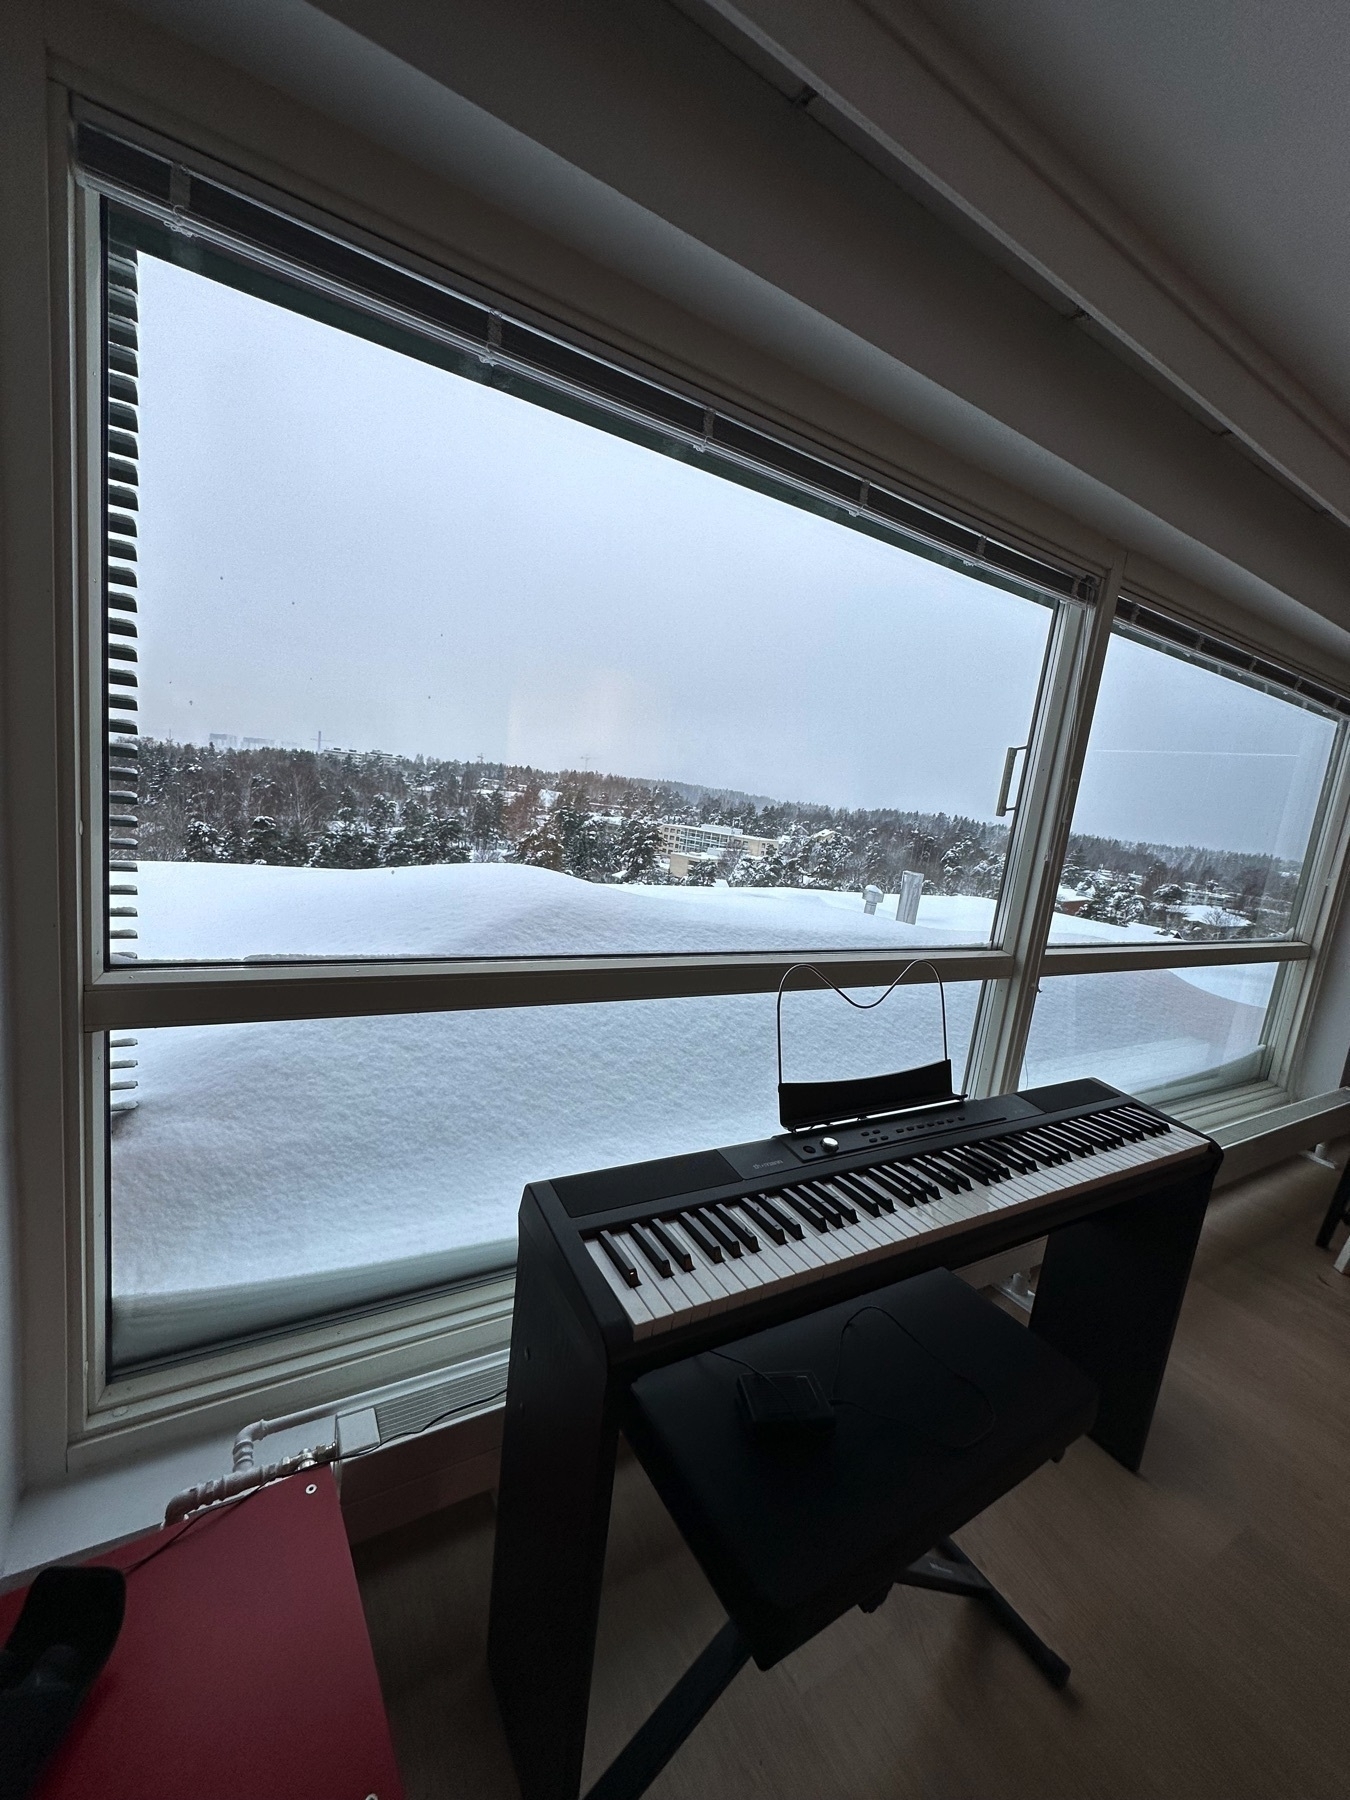 A three feet/one meter tall pile of packed snow outside of a window. Electric piano in front of the window